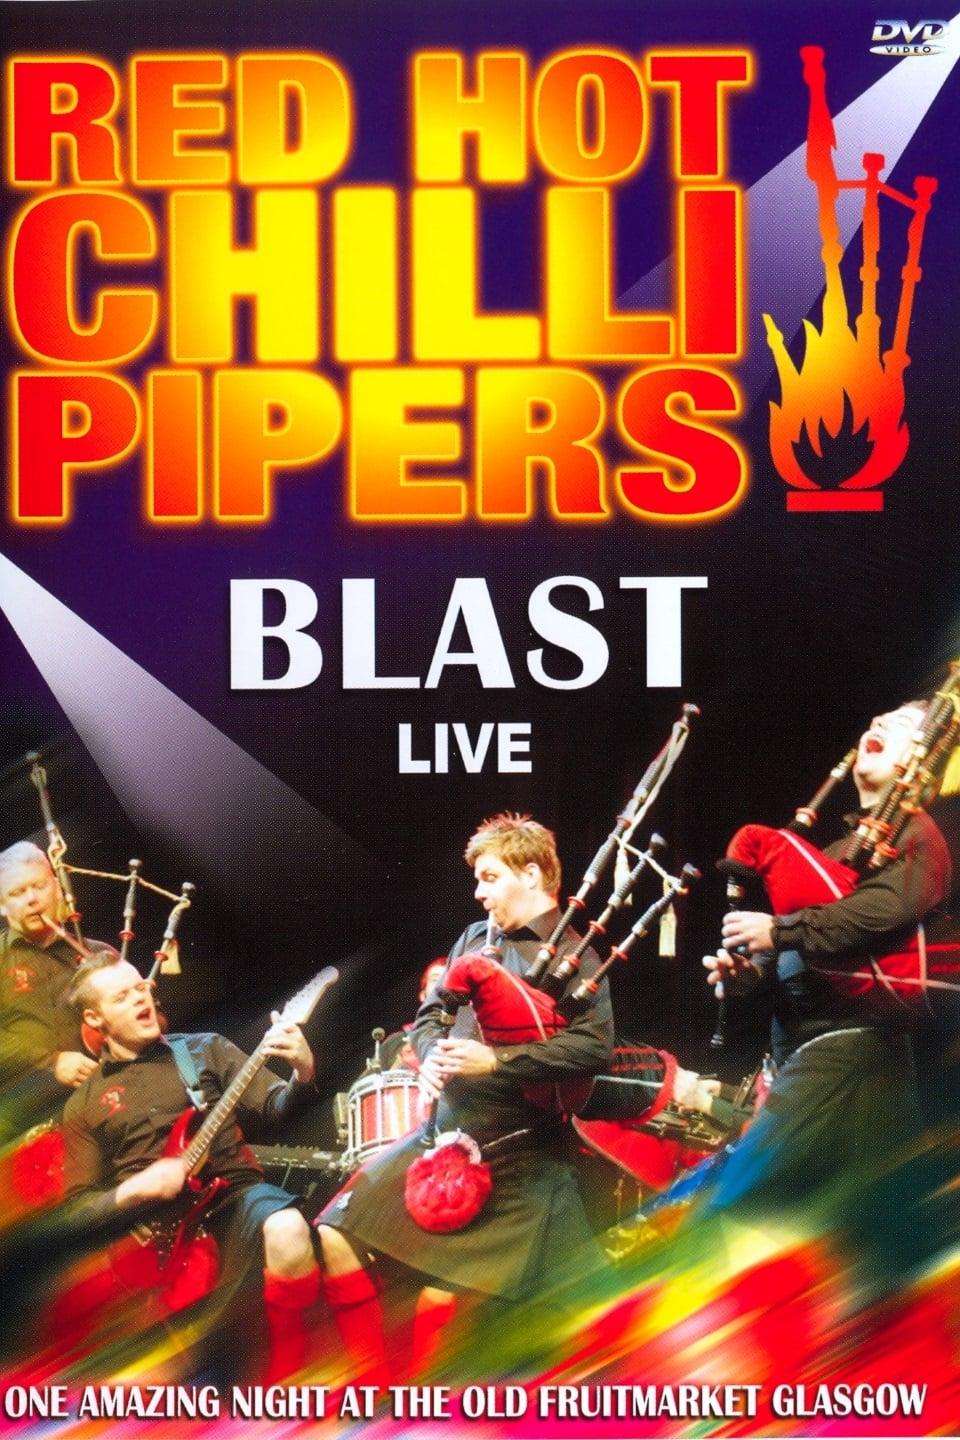 Red Hot Chilli Pipers - Blast Live poster